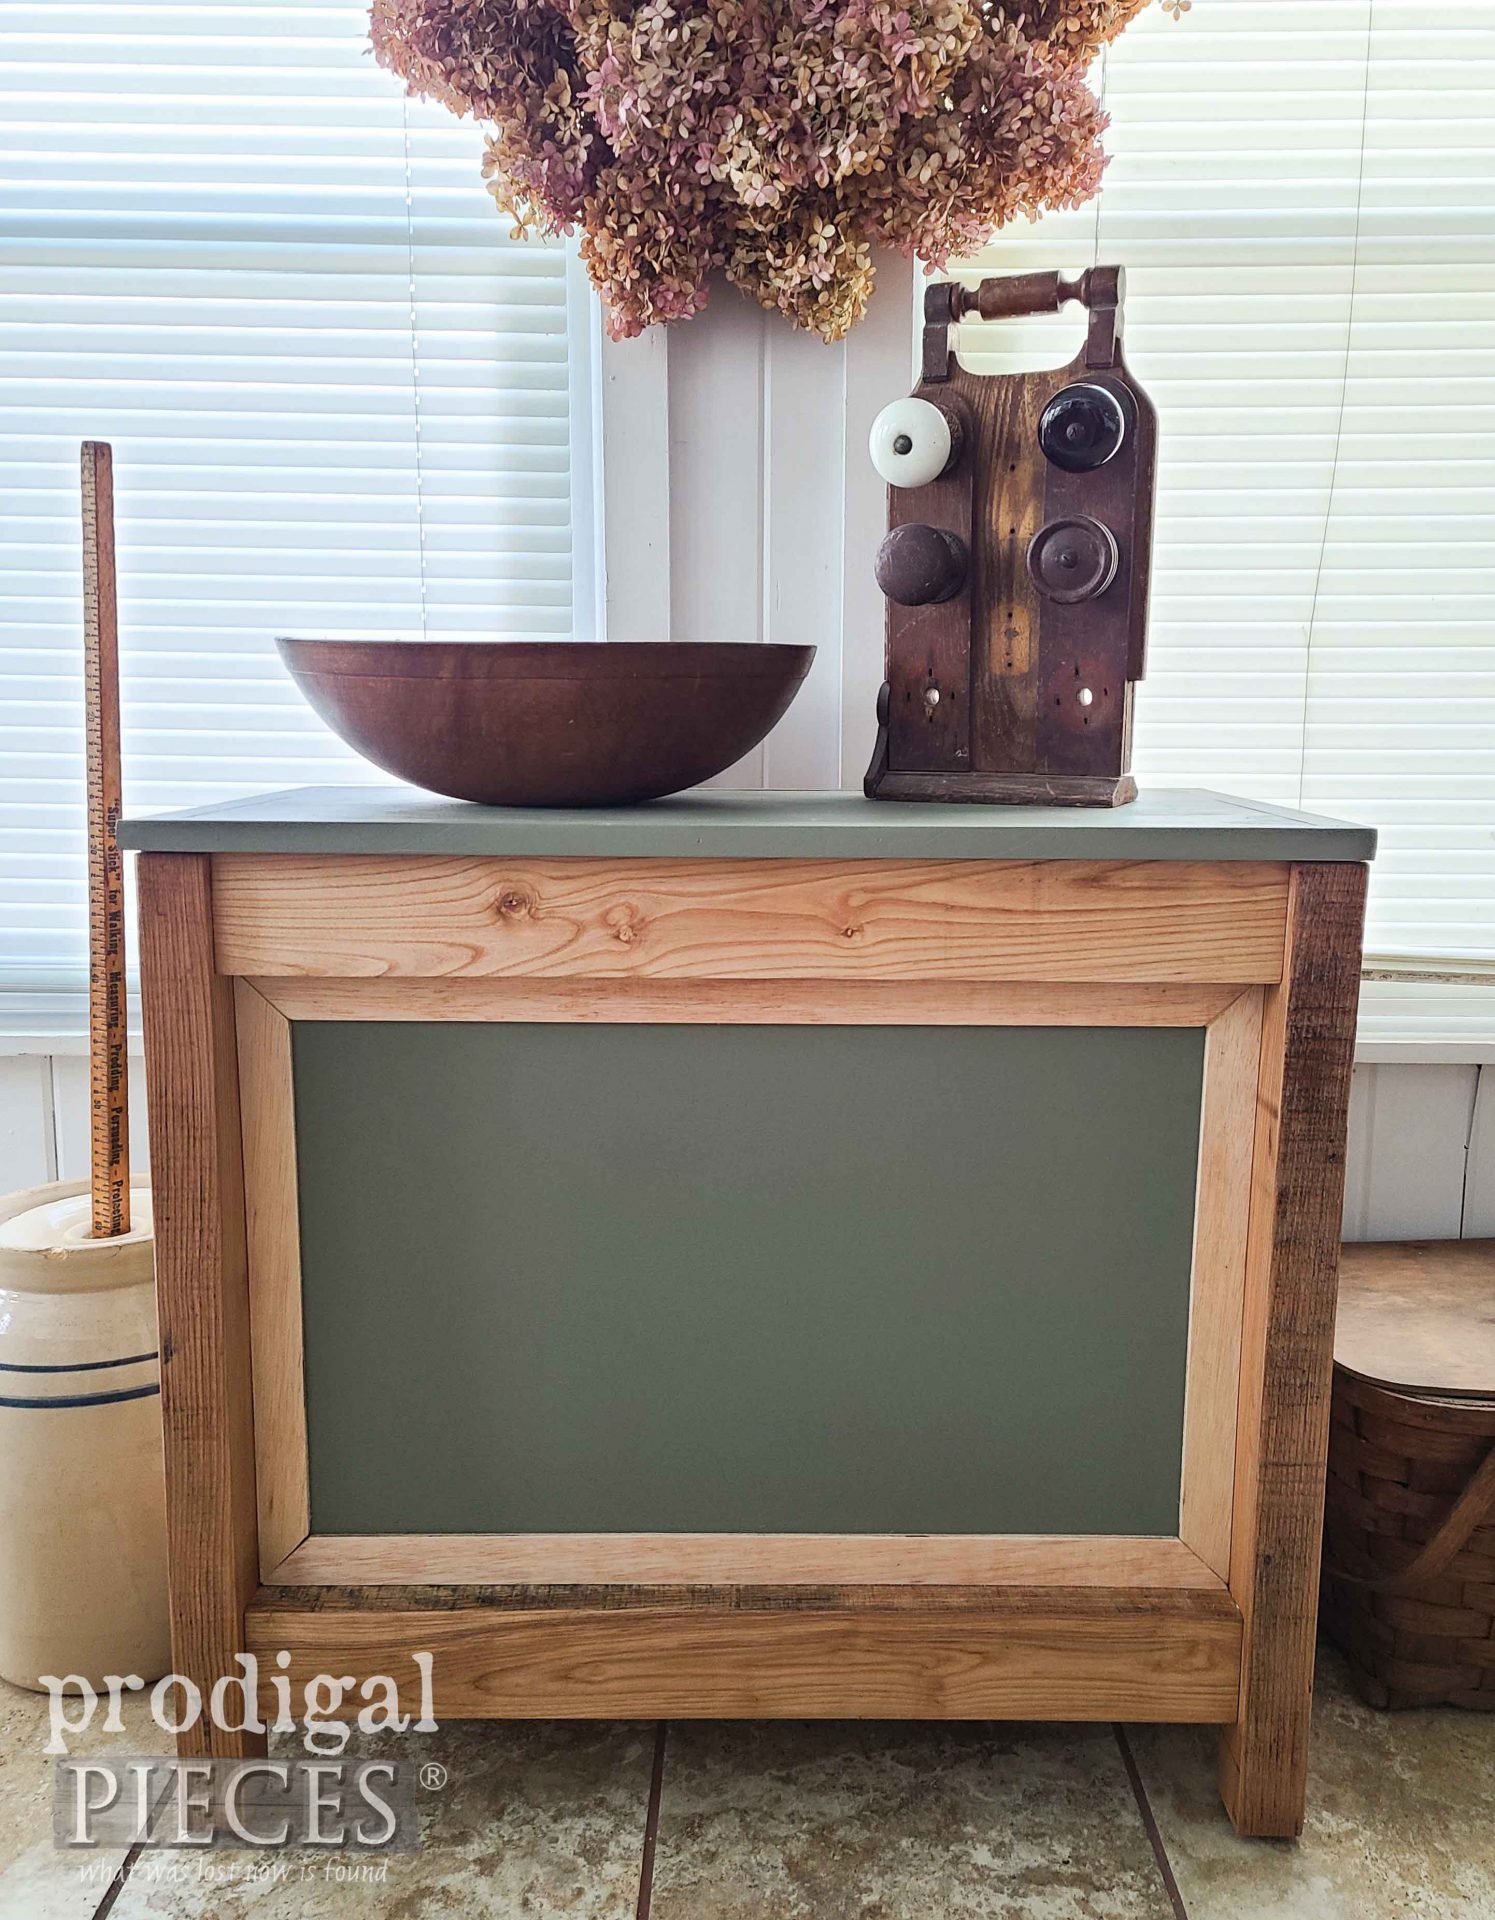 Handmade Farmhouse Chest with Storage Built from Reclaimed Pallet Wood by Larissa of Prodigal Pieces | prodigalpieces.com #prodigalpieces #farmhouse #diy #reclaimed #home